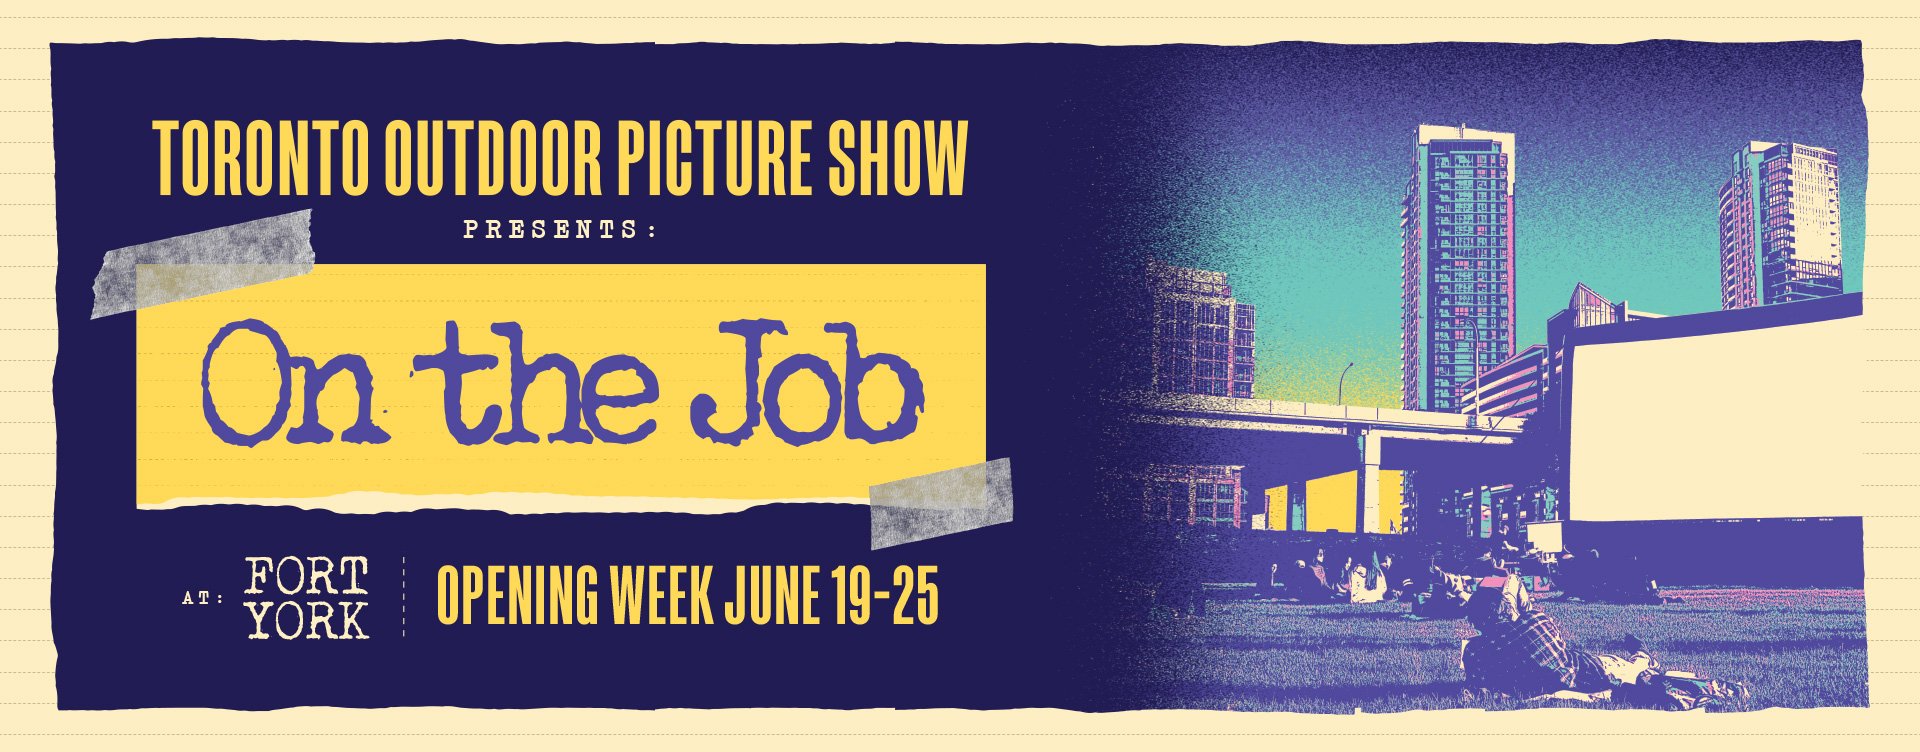 TOPS presents "On the Job" at Fort York - June 19-25